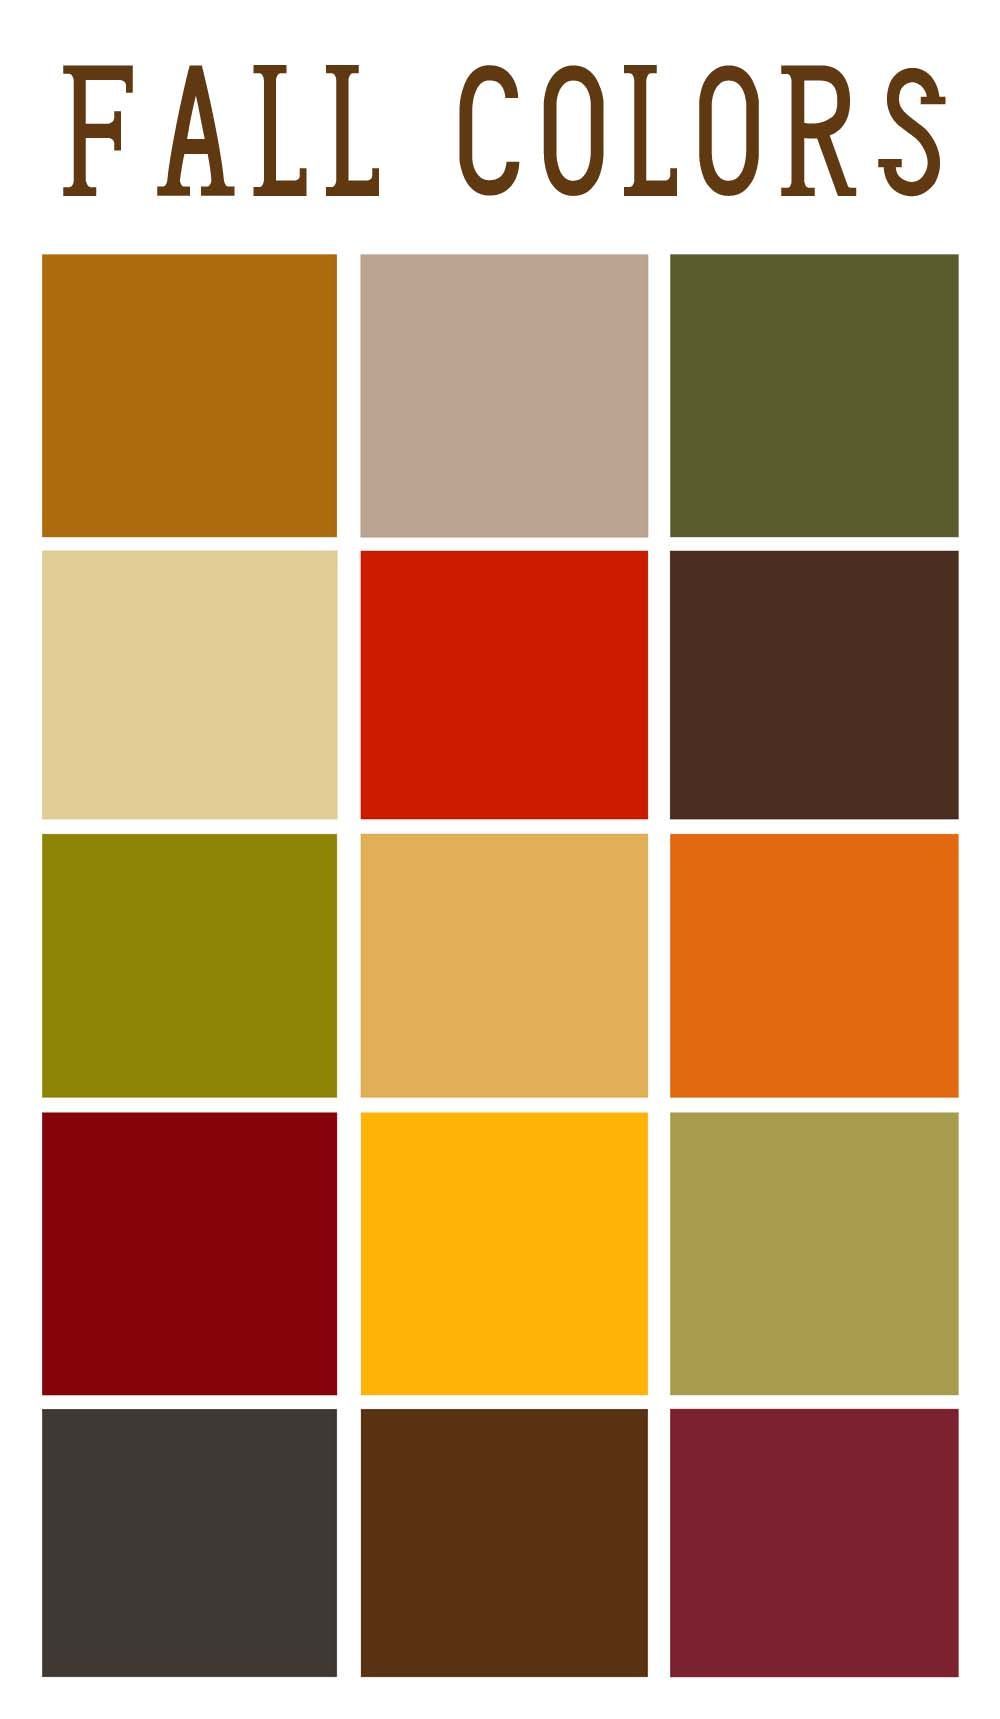 Fall Color Palette! My two wedding colours on here. :) perfect for my fall wedding!